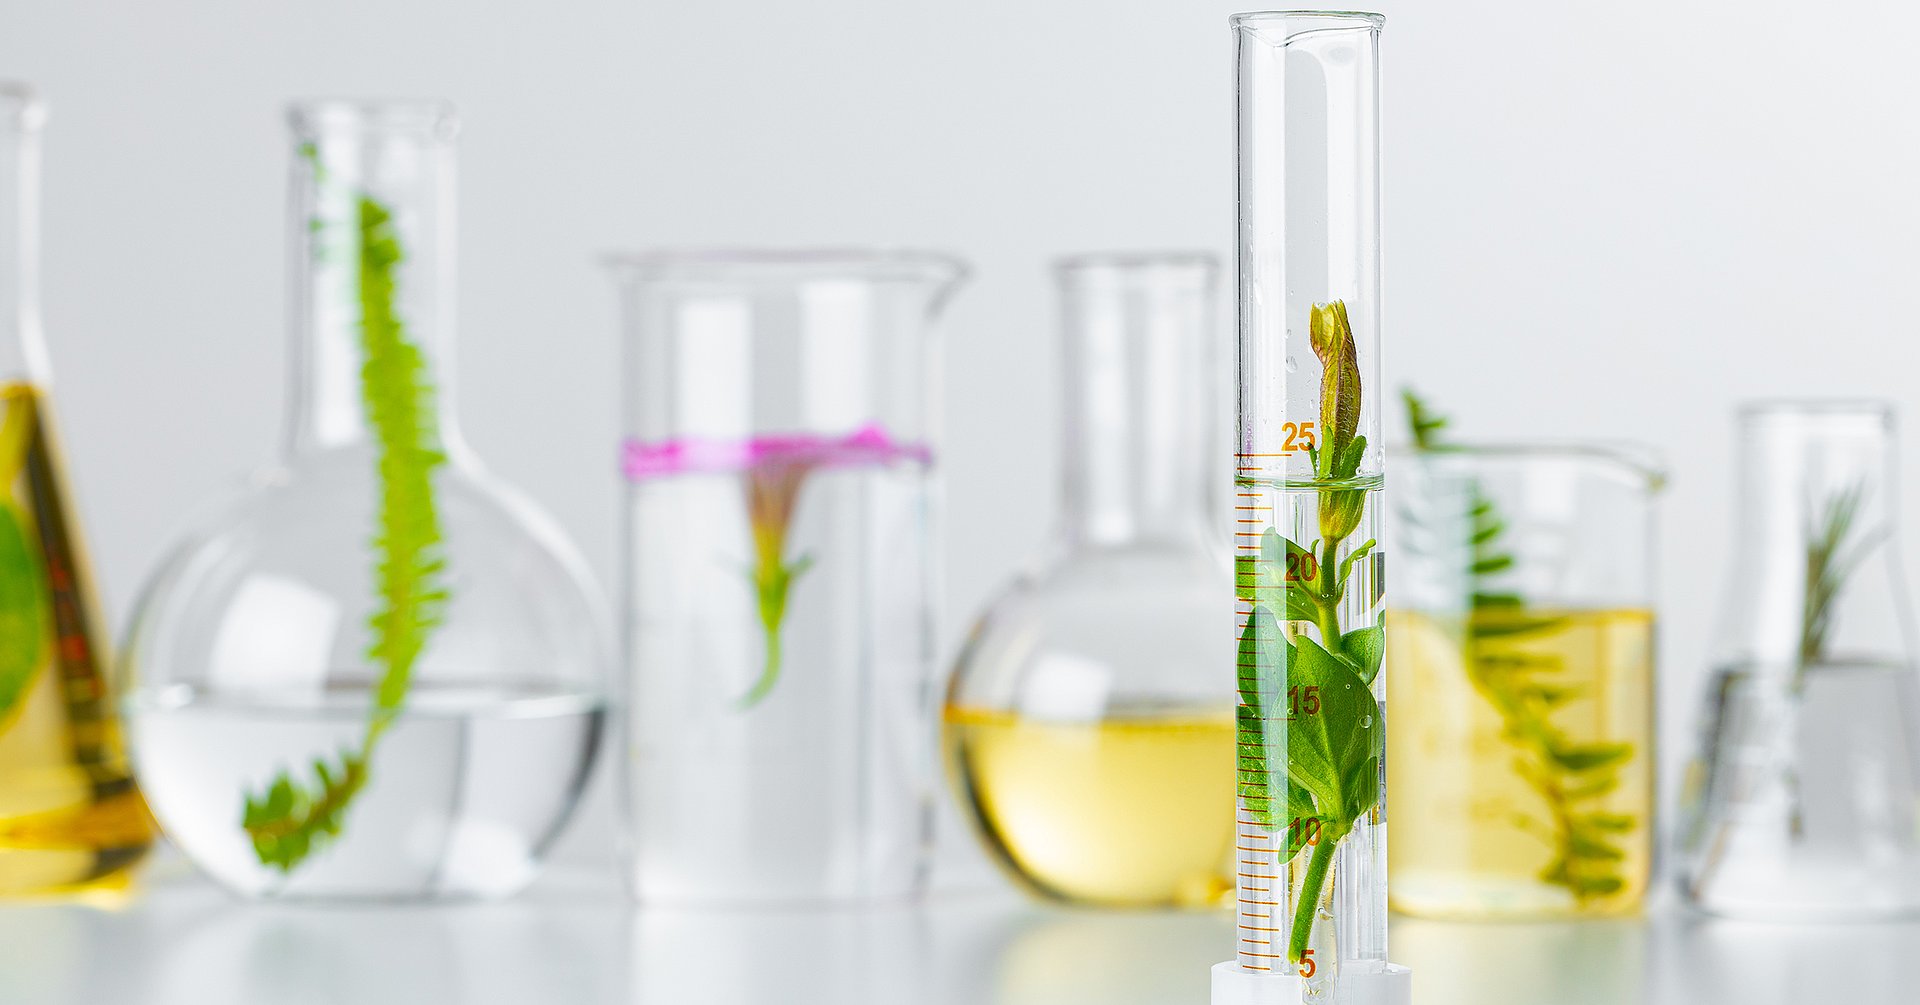 Plants in laboratory glassware. Skincare products and drugs chemical researches concept